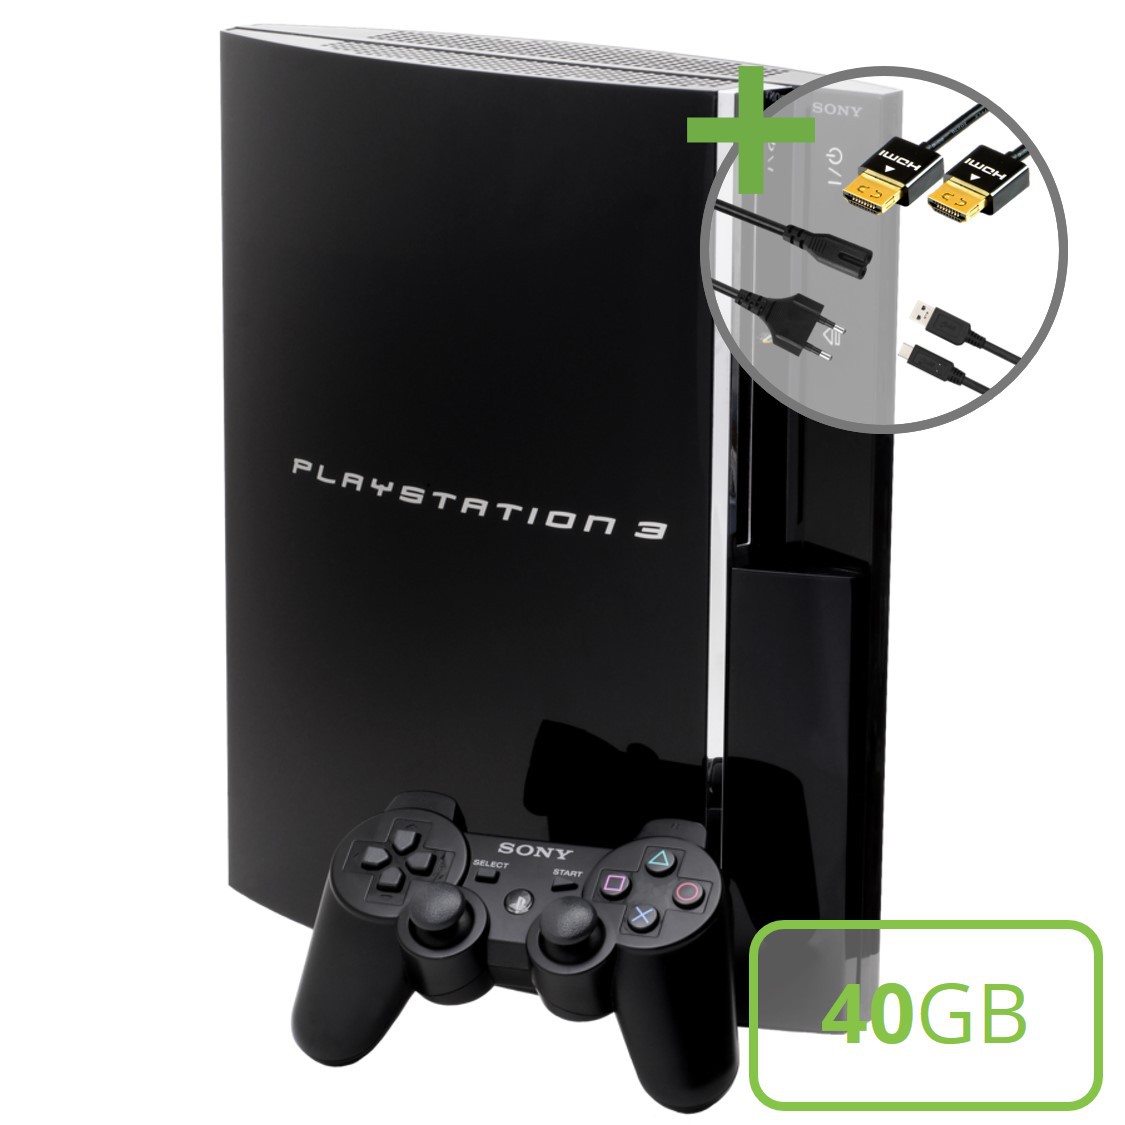 Sony PlayStation 3 Phat (40GB) Starter Pack - Sixaxis Edition - Playstation 3 Hardware - 2